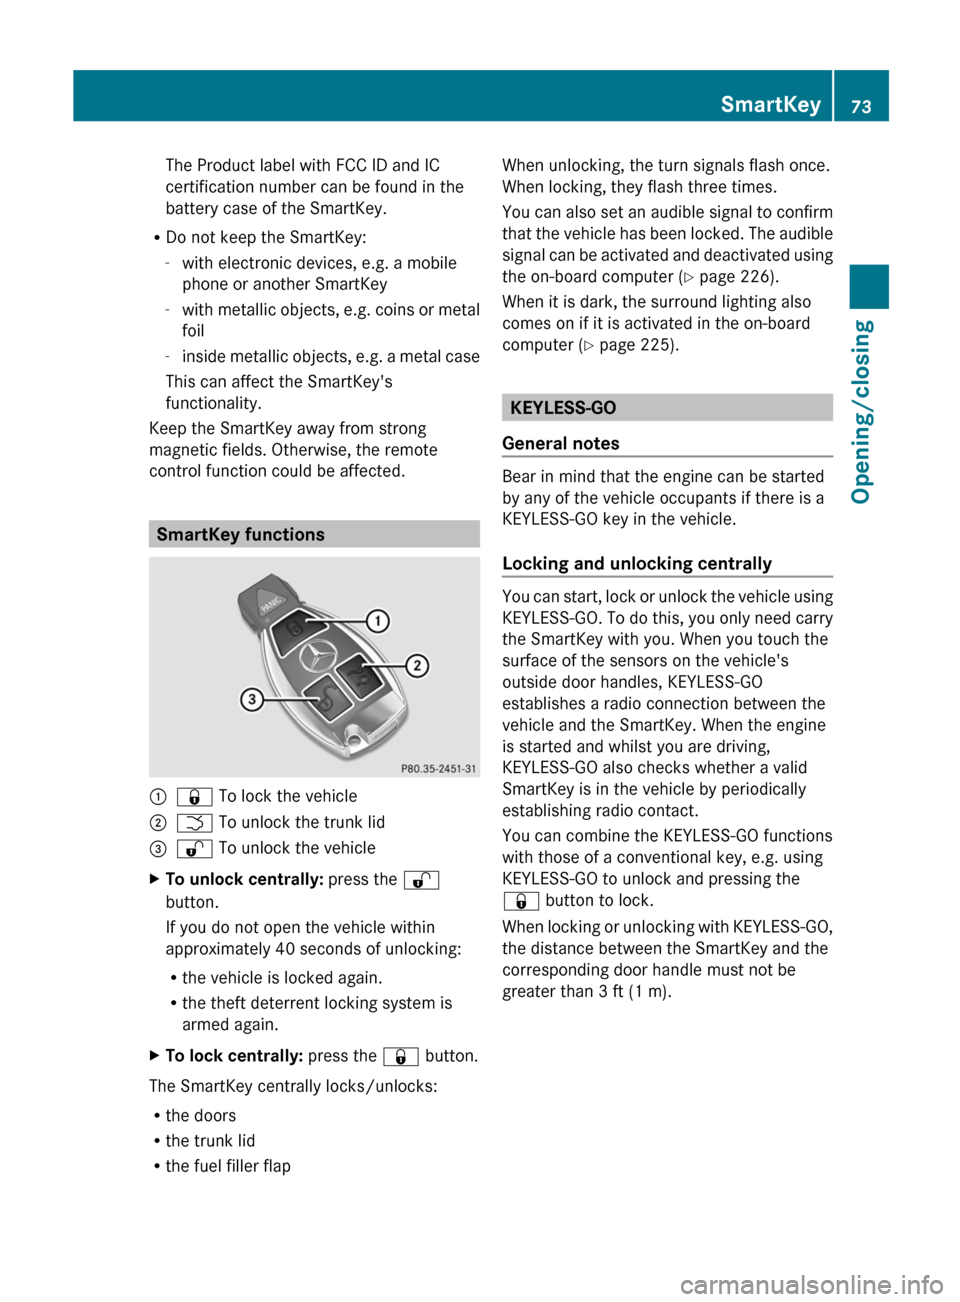 MERCEDES-BENZ E-Class CABRIOLET 2013 C207 Manual PDF The Product label with FCC ID and IC
certification number can be found in the
battery case of the SmartKey.
R Do not keep the SmartKey:
-with electronic devices, e.g. a mobile
phone or another SmartKe